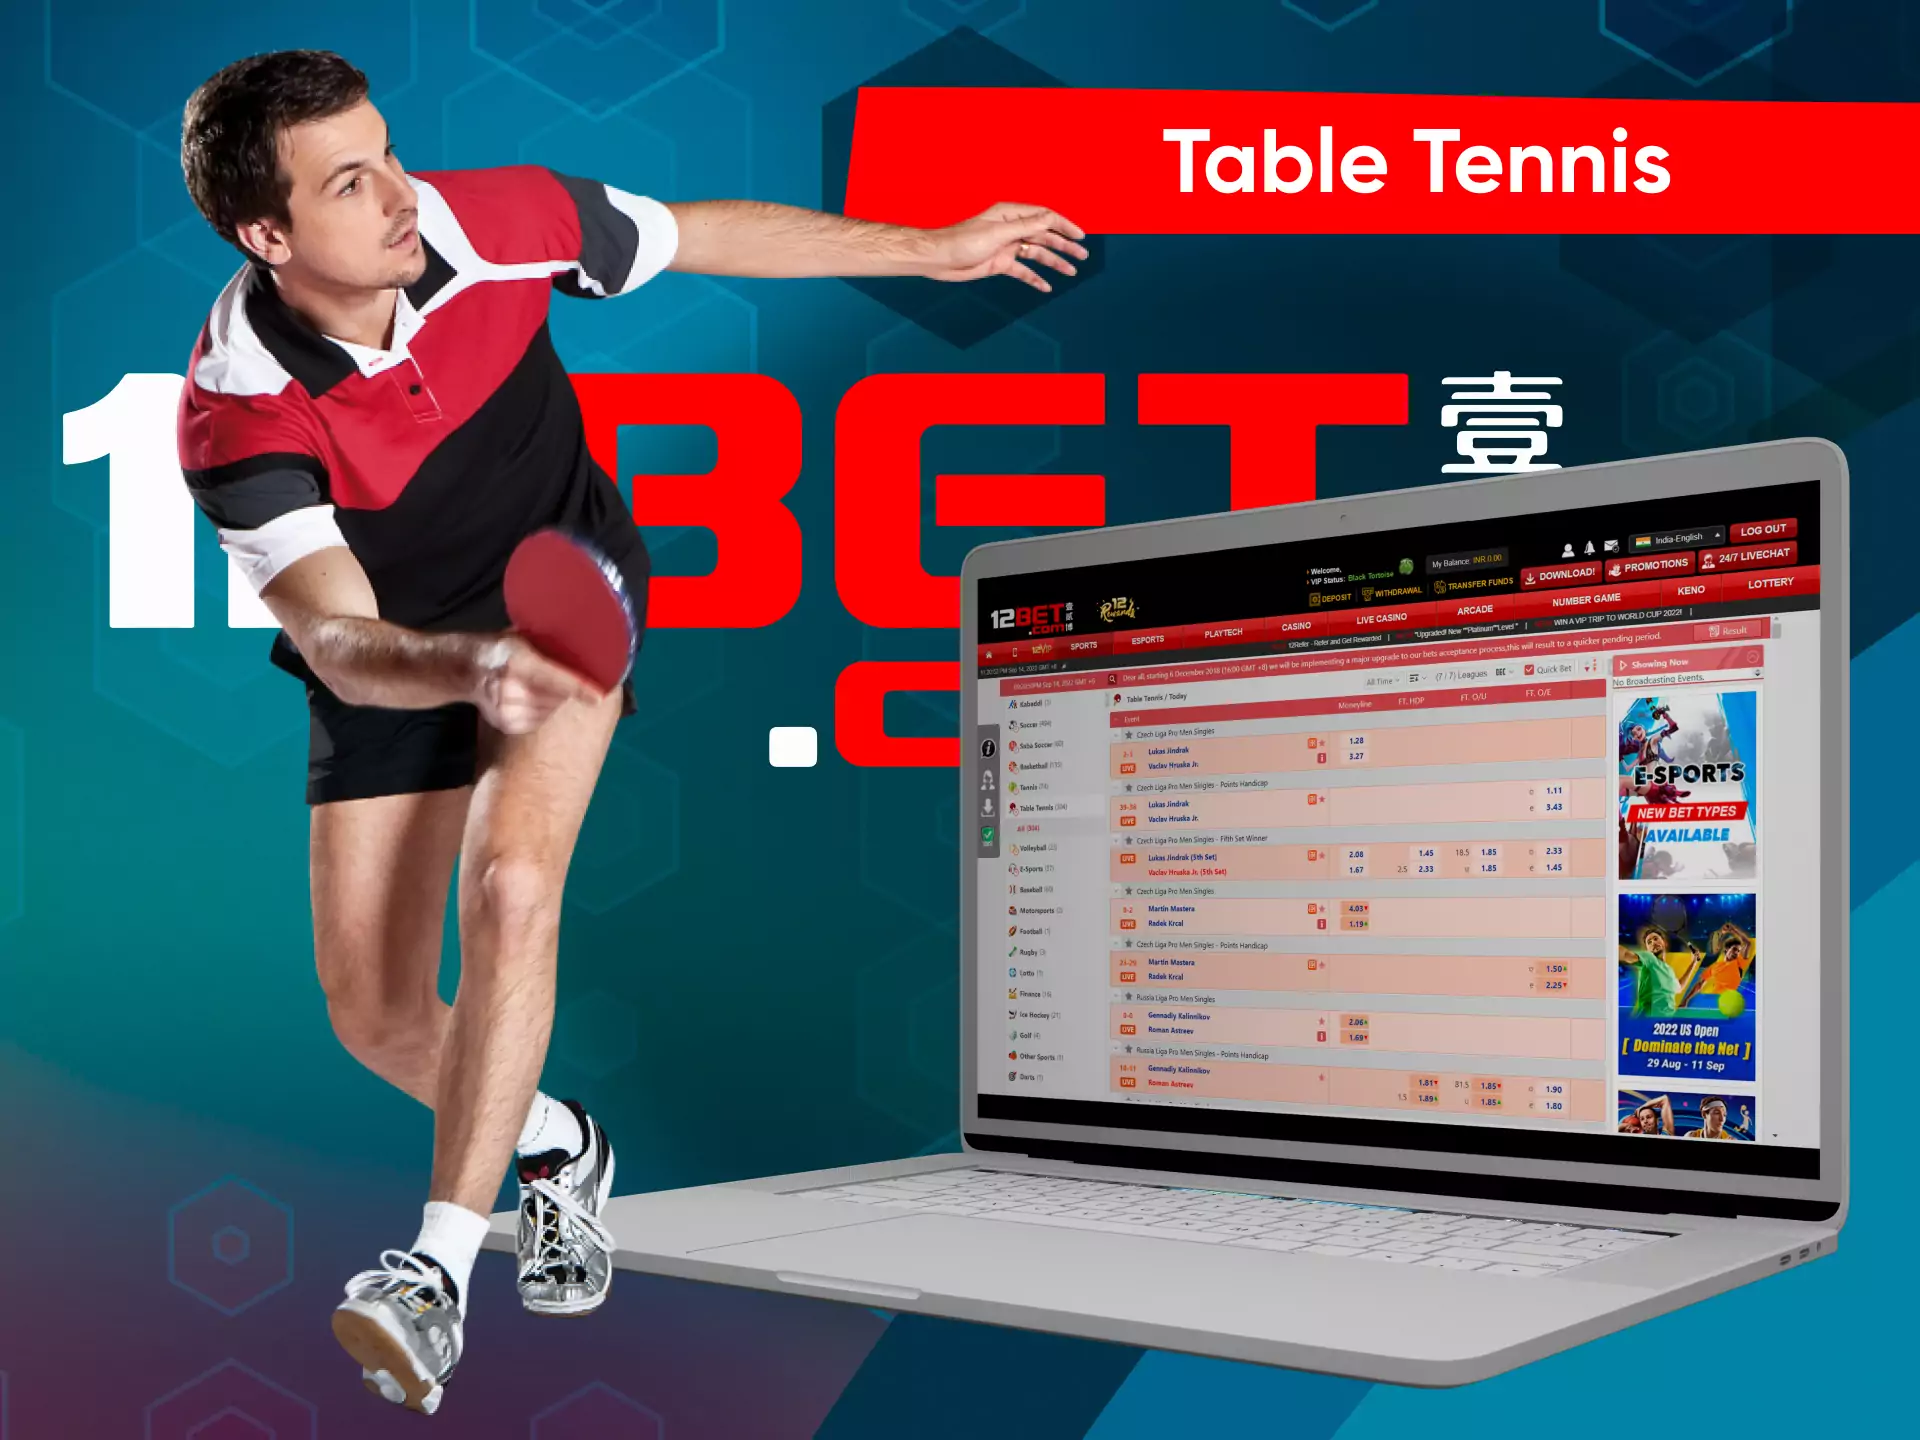 Besides all, there are lots of events for table tennis available for betting on 12bet.